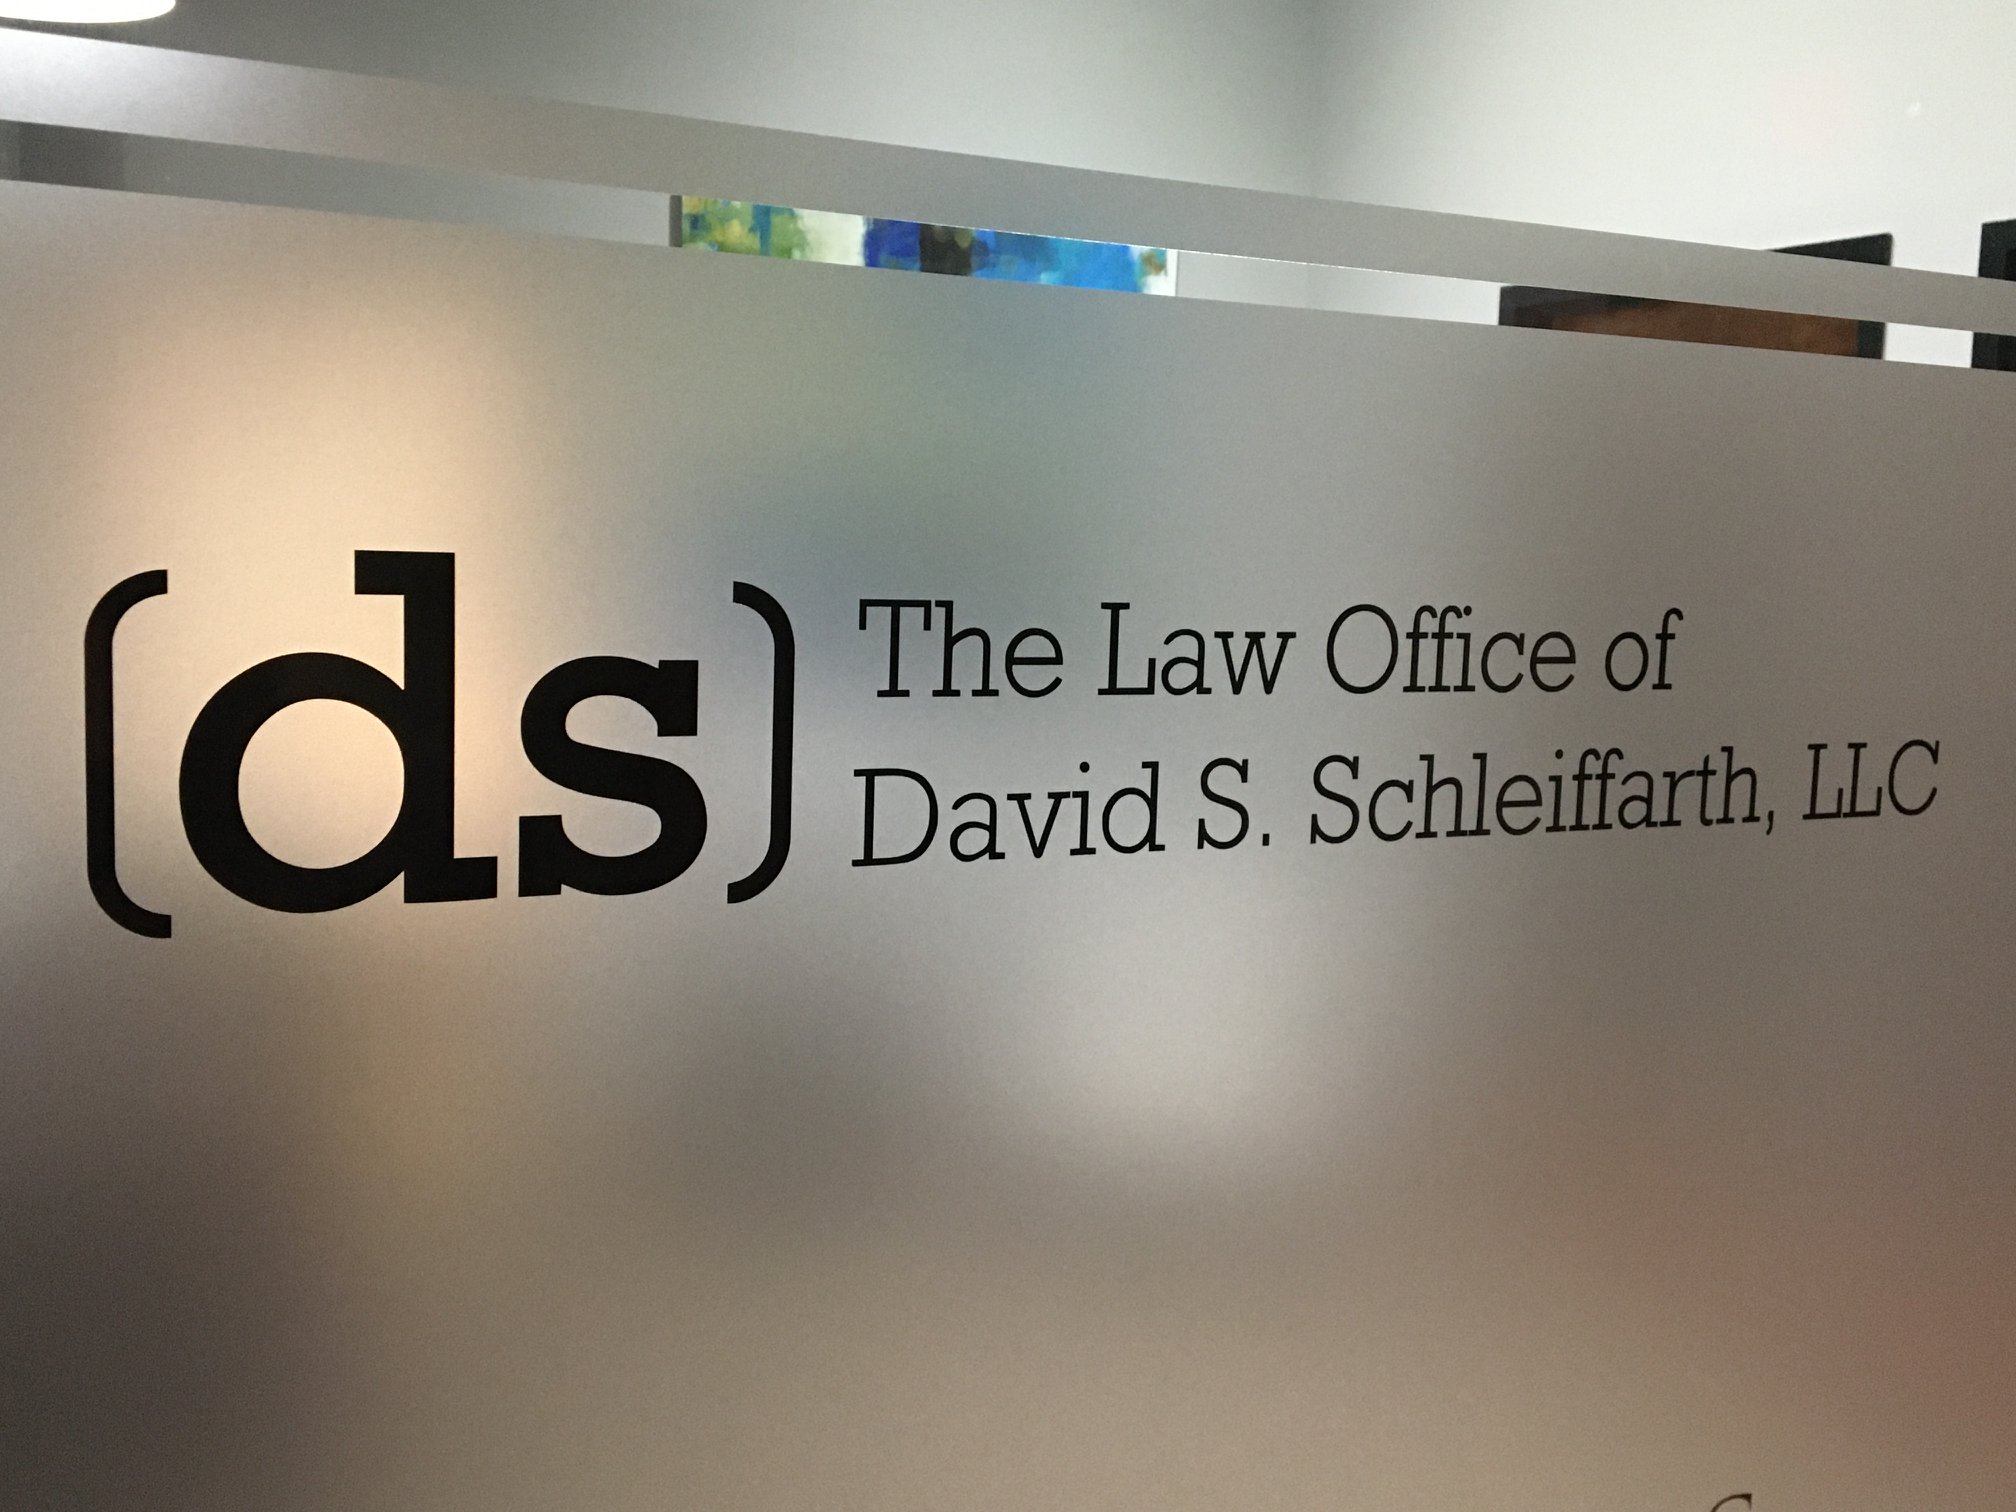 The Law Office of David S. Schleiffarth, LLC | 75 W Lockwood Ave # 1, Webster Groves, MO 63119, United States | Phone: (314) 448-0527